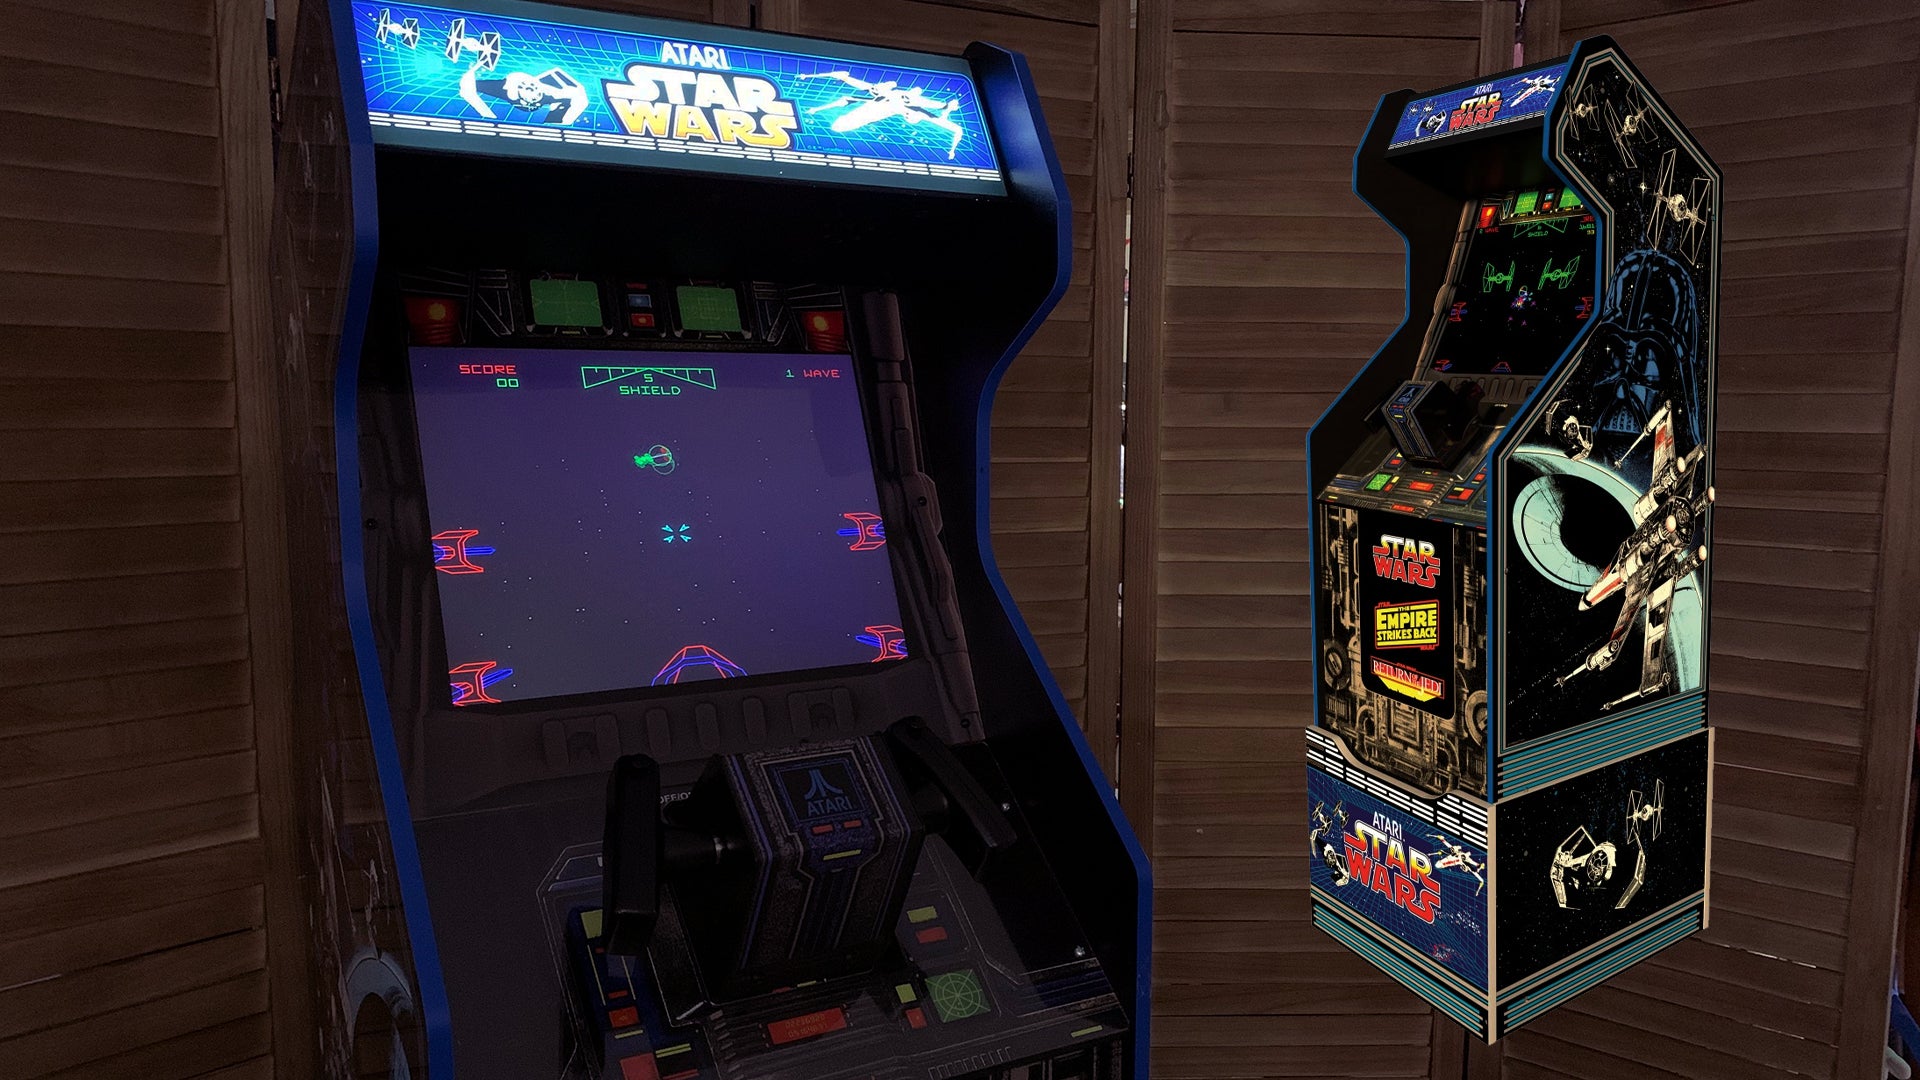 All The Star Wars I Need Is This Home Arcade Machine